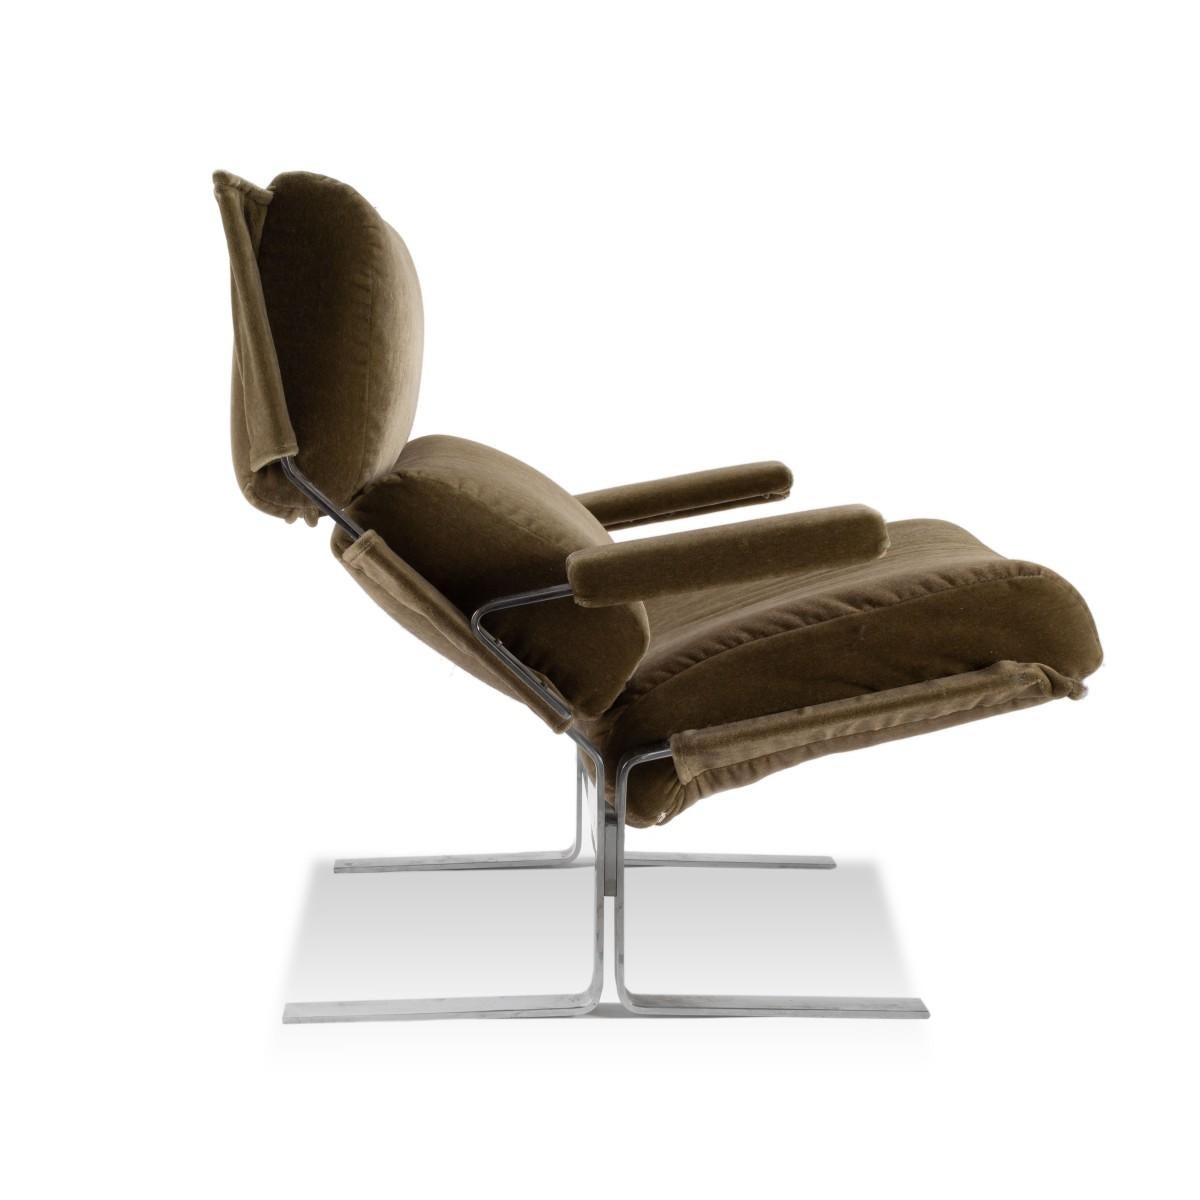 A Saporiti lounge chair with matching ottoman by Richard Hersherger for Saporiti, Italy, circa 1970.

Features a polished chrome frame with taupe velvet upholstery. 

Measures: Seat height 18.5 inches
Ottoman Dim: 28 x 23 x 15.